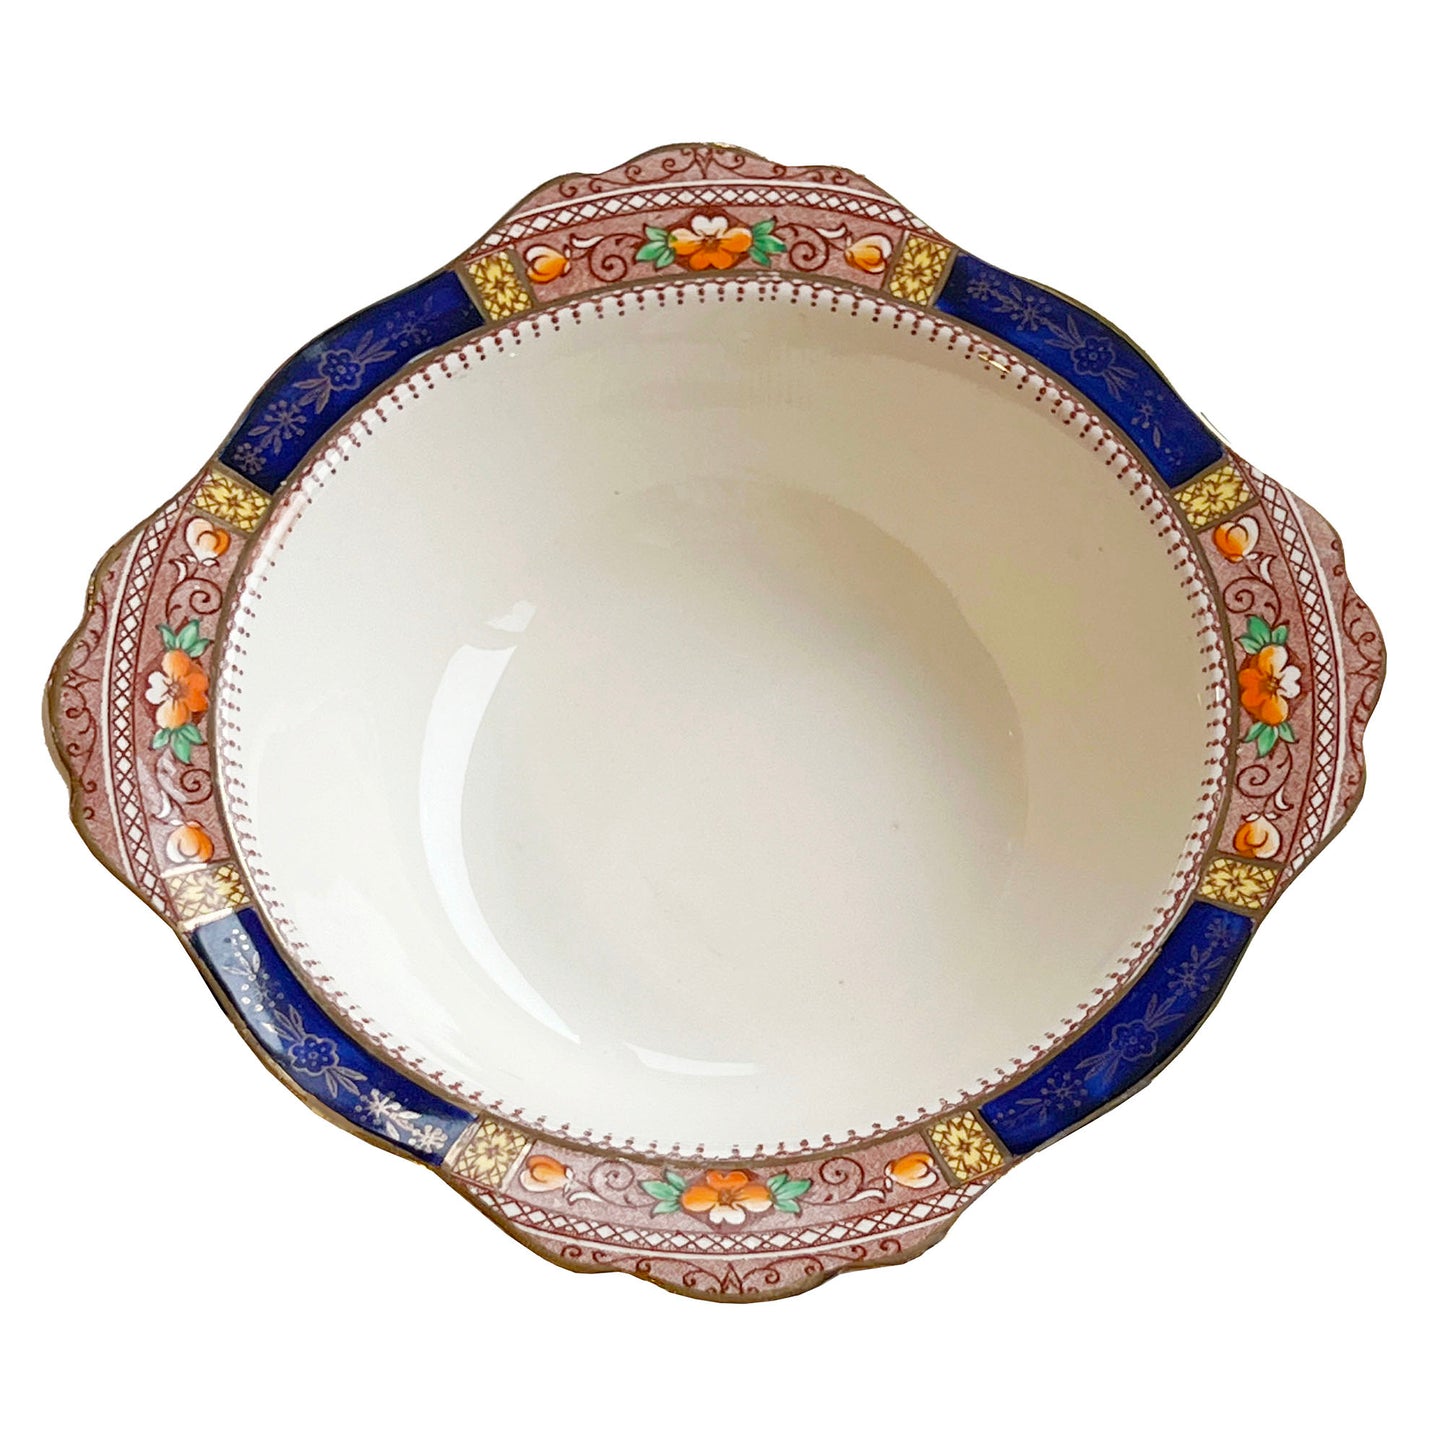 Queen-Mary-Sol-9-inch-Serving-Bowl-by-J_G-Meakin.-Shop-eBargainsAndDeals.com